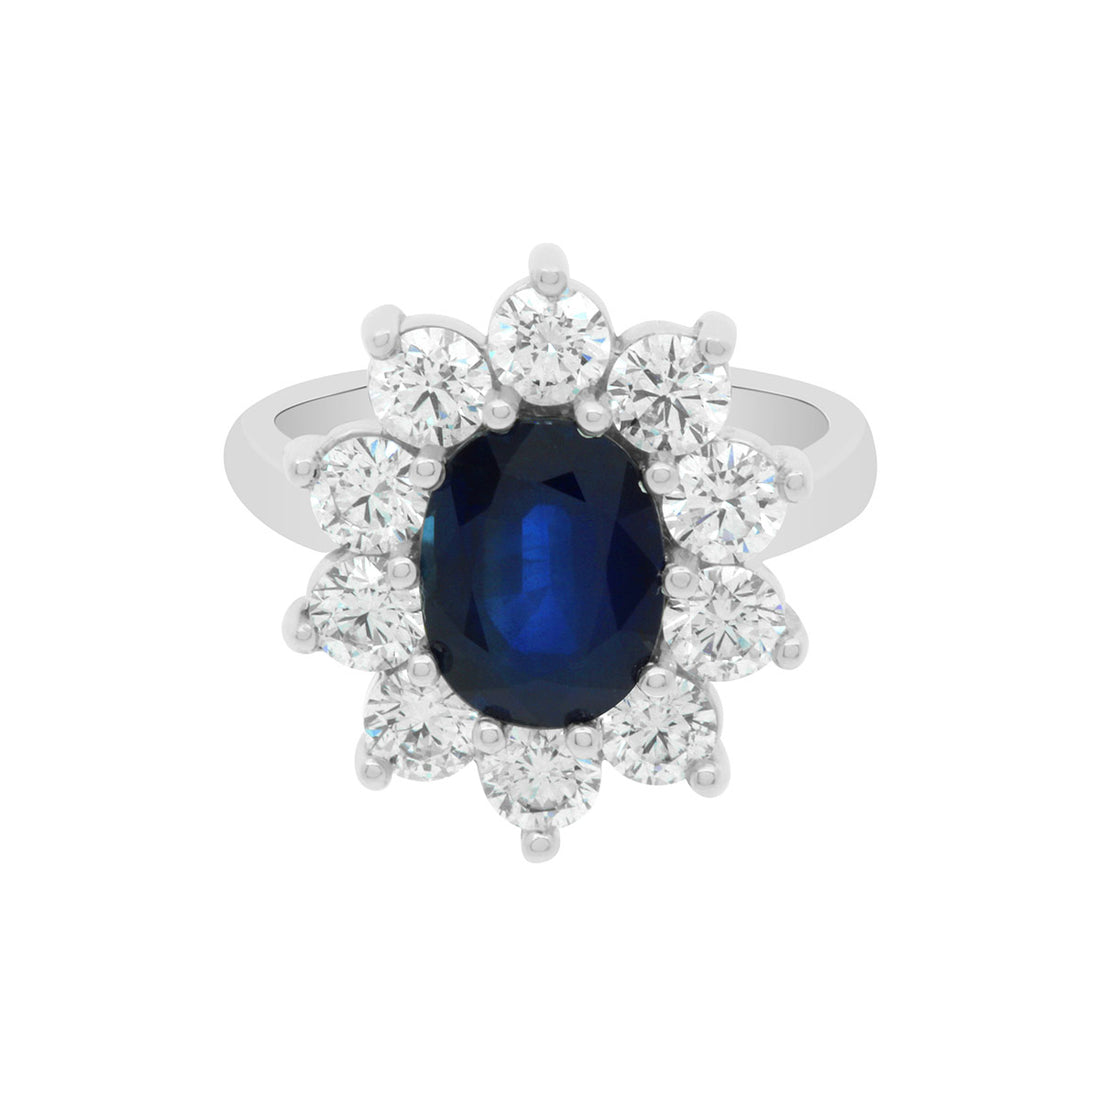 Sapphire Engagement Ring in white gold with a cluster of sparkling white diamonds